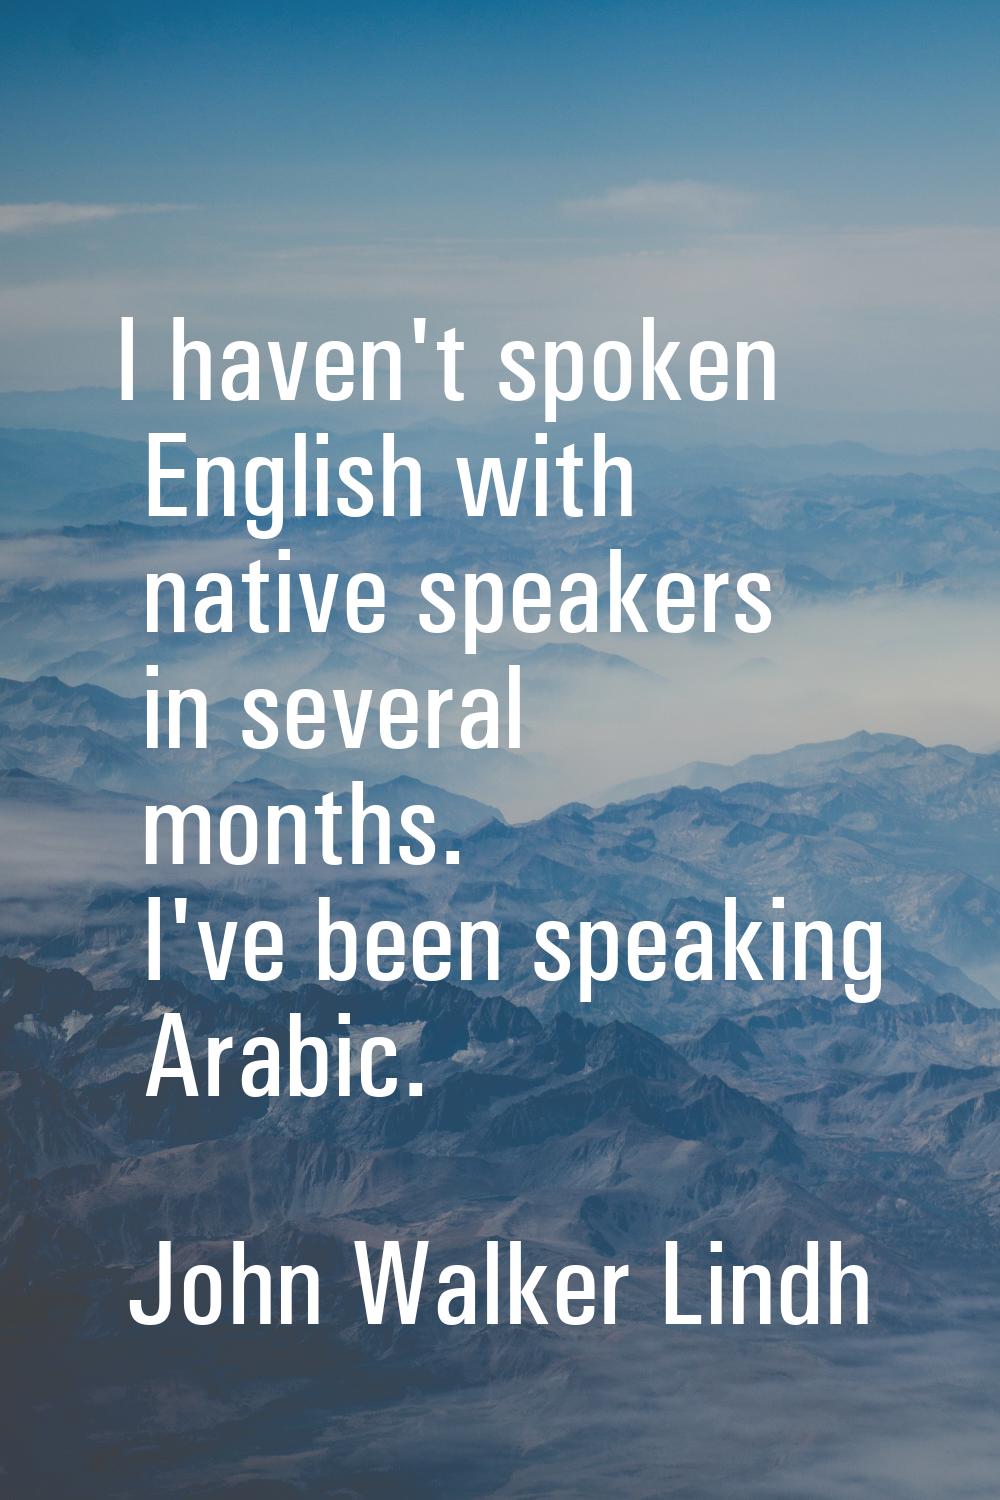 I haven't spoken English with native speakers in several months. I've been speaking Arabic.